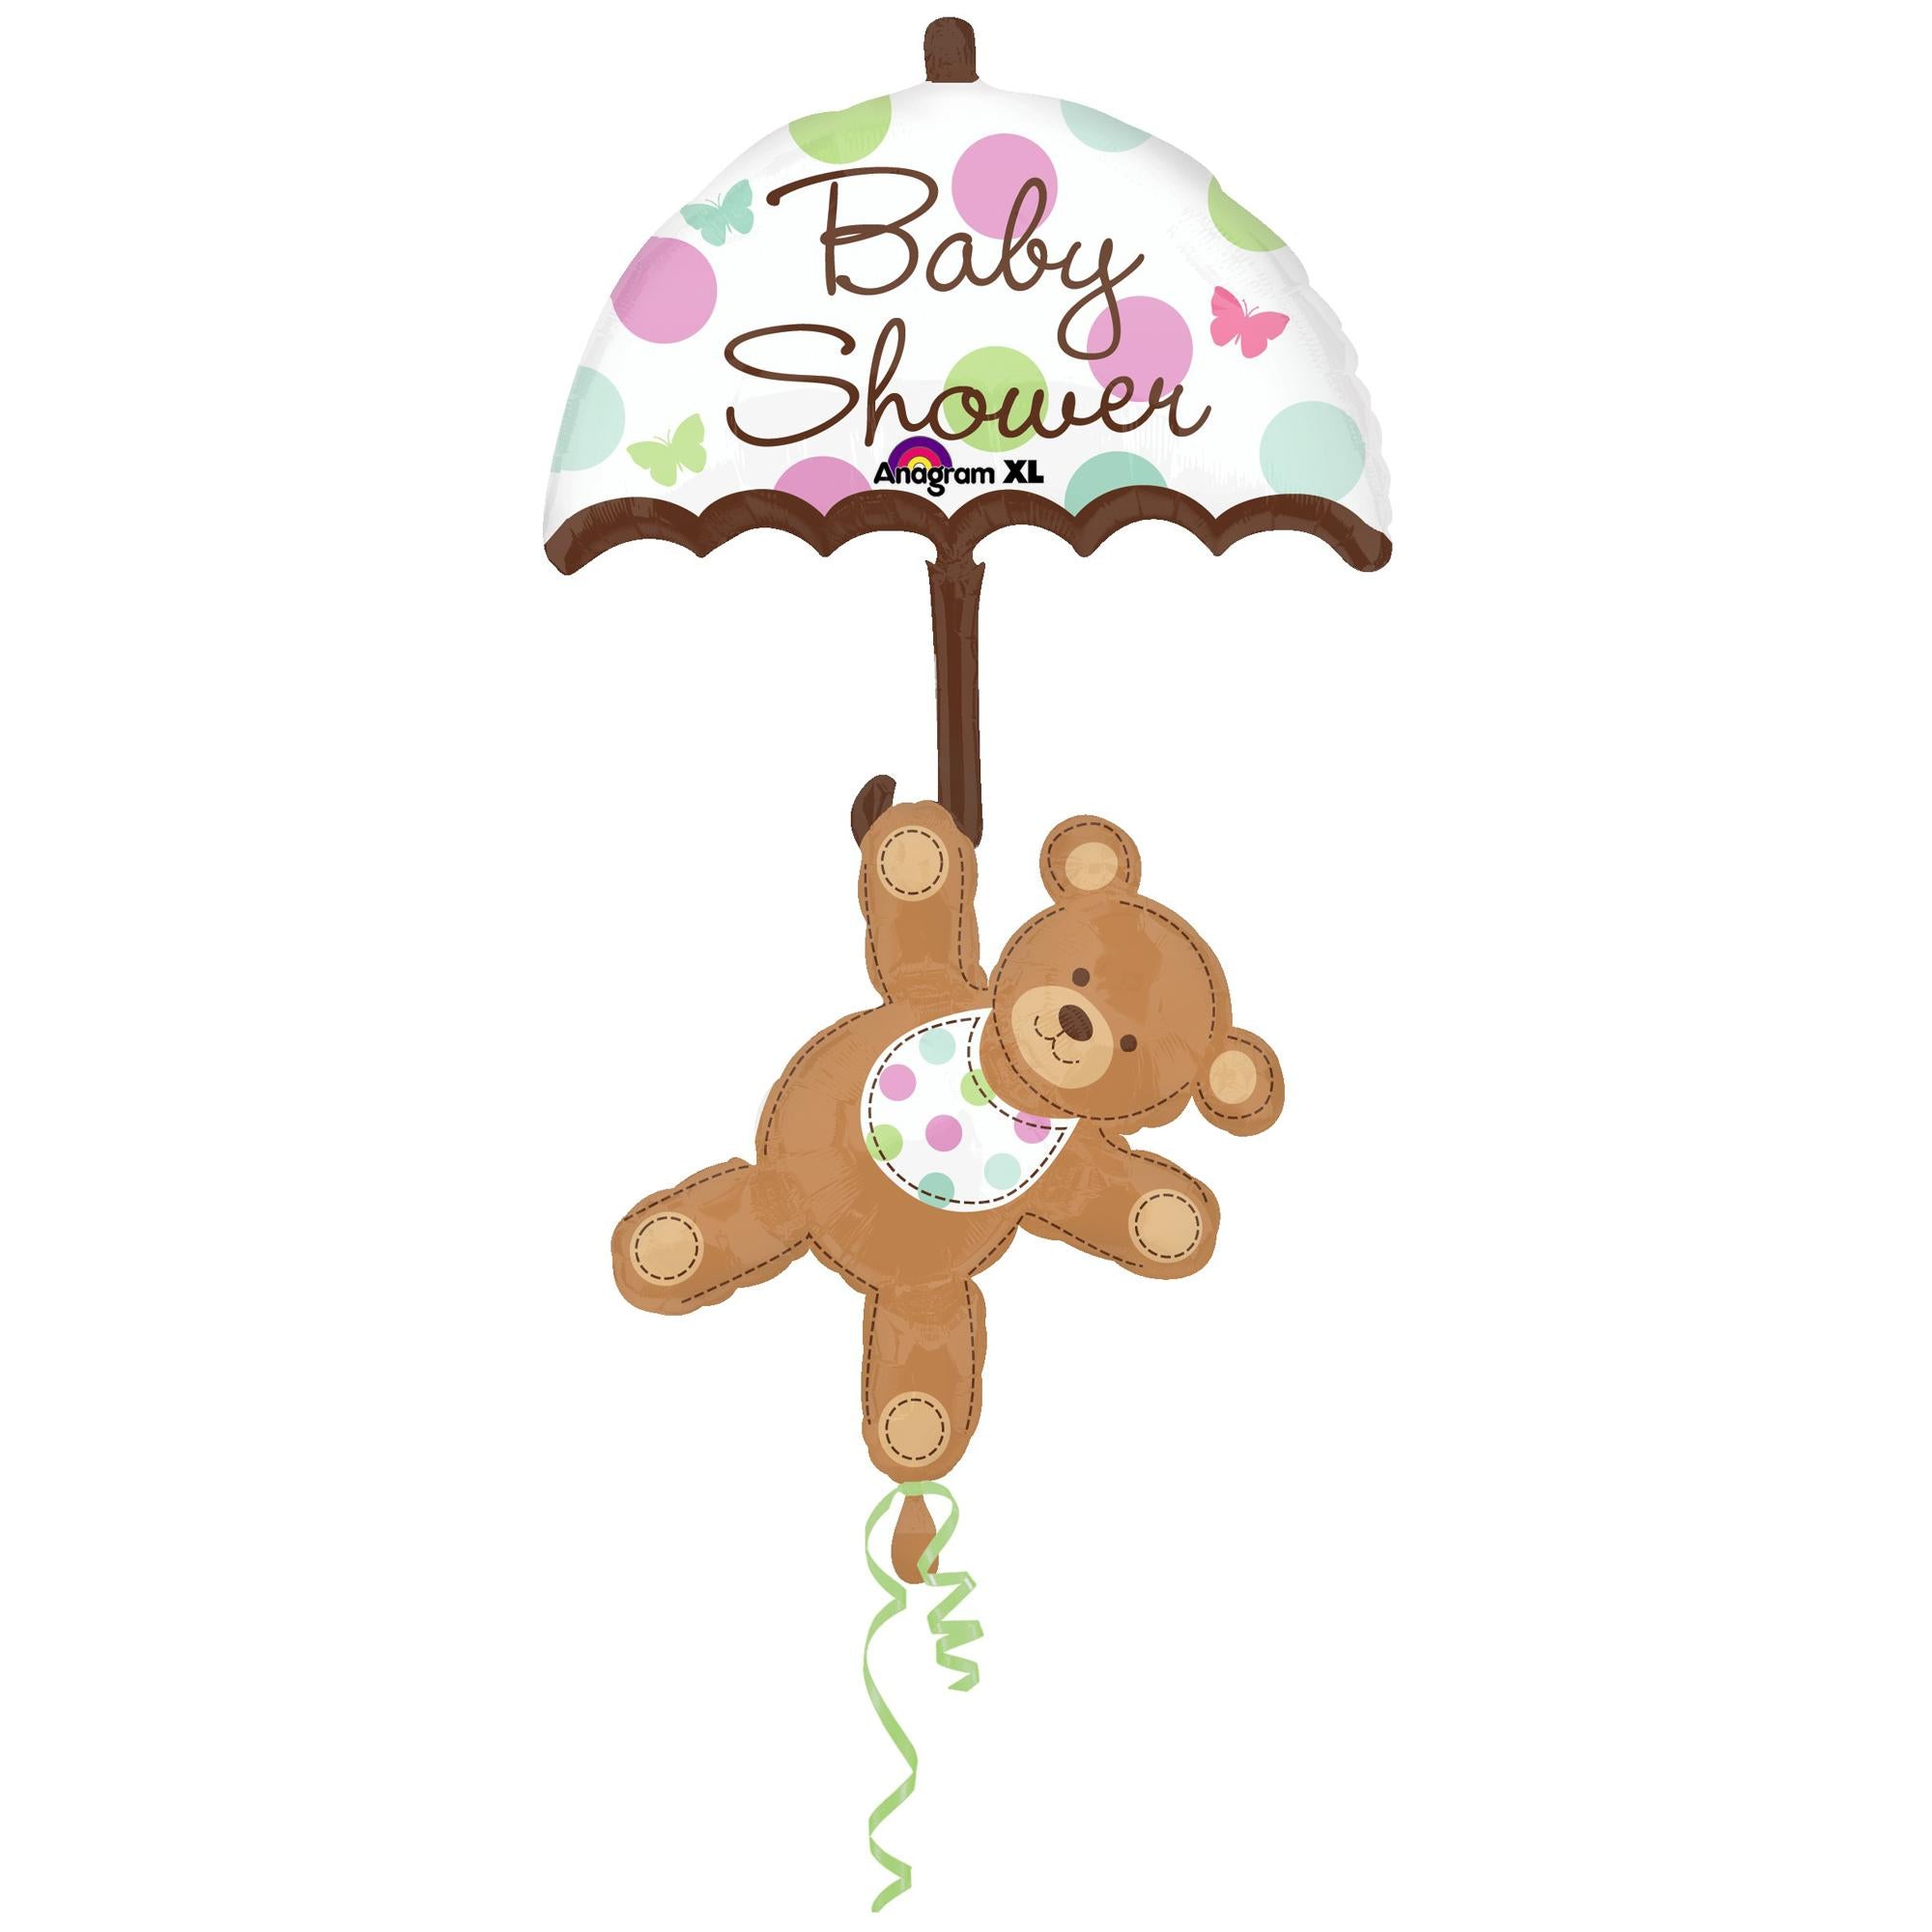 Baby Shower Umbrella And Bear Balloon 24 x 49in Balloons & Streamers - Party Centre